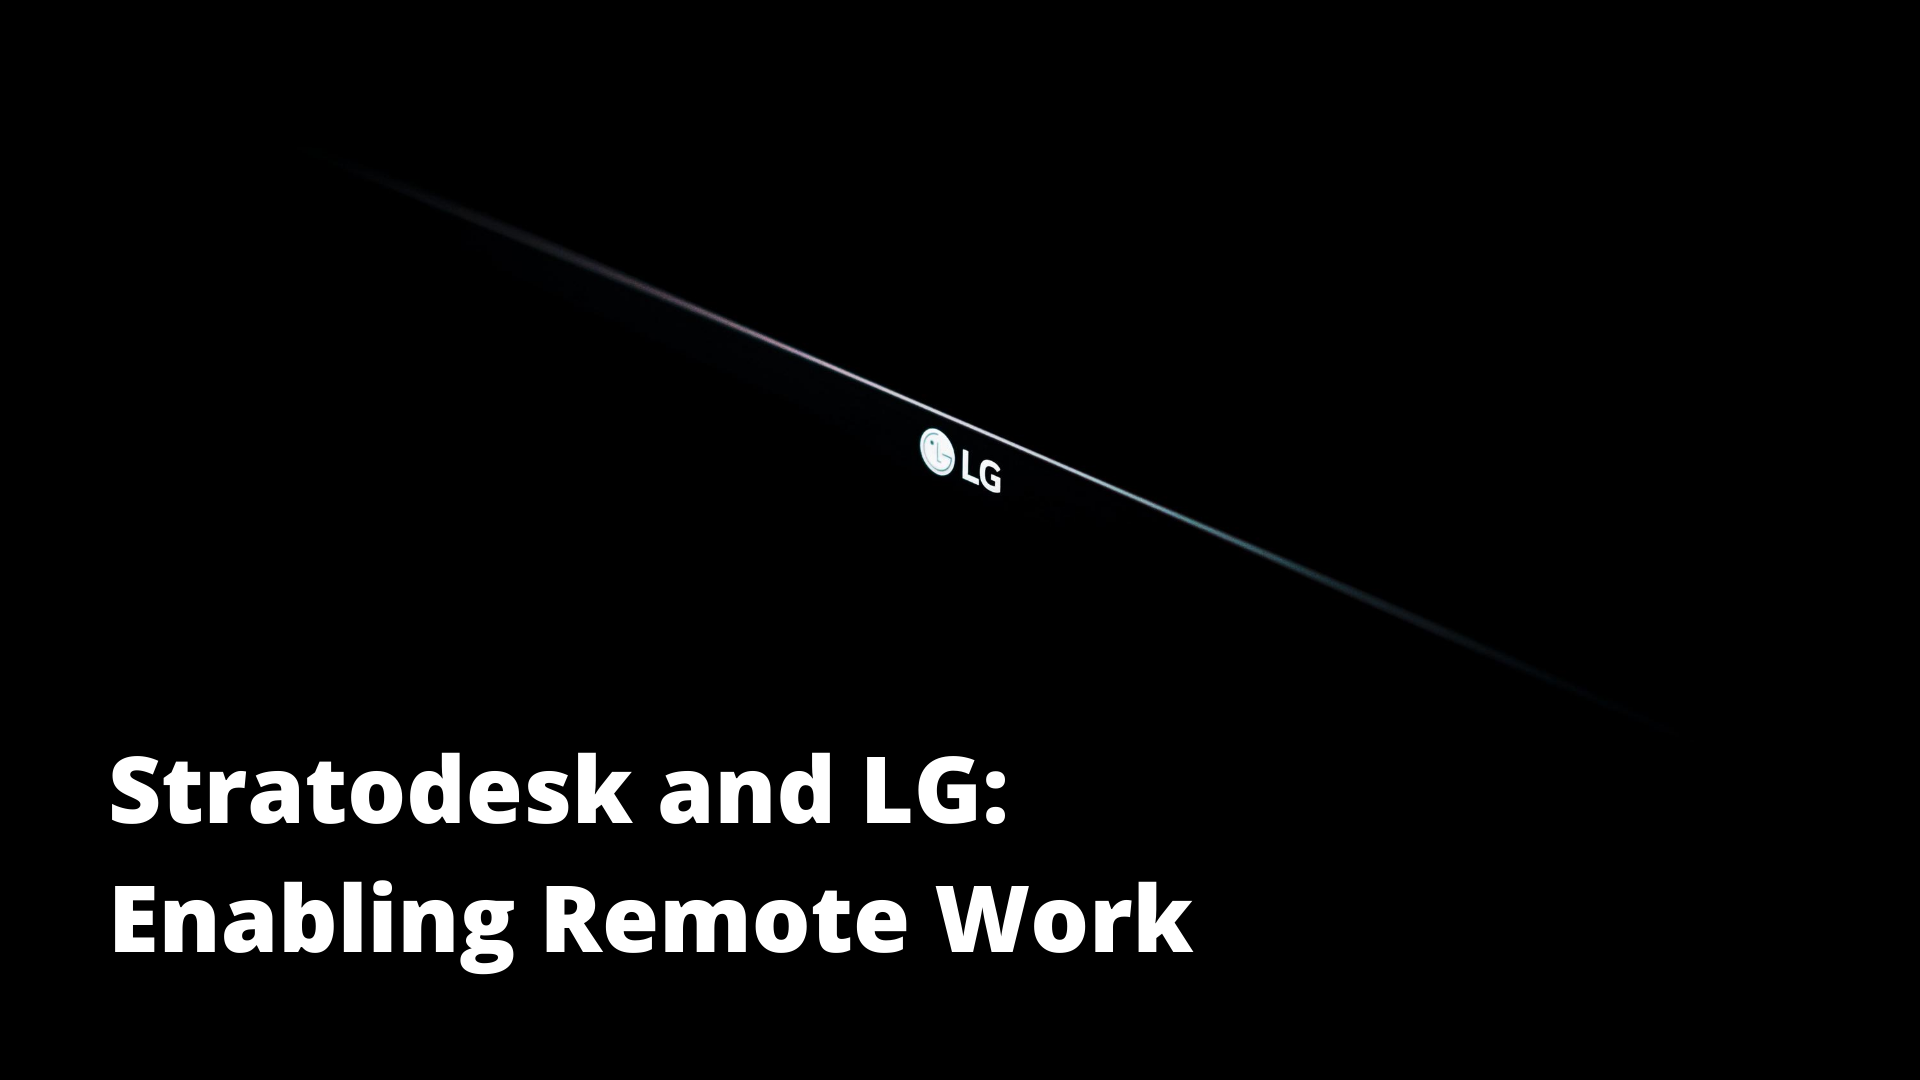 LG and Stratodesk Enable Remote Work